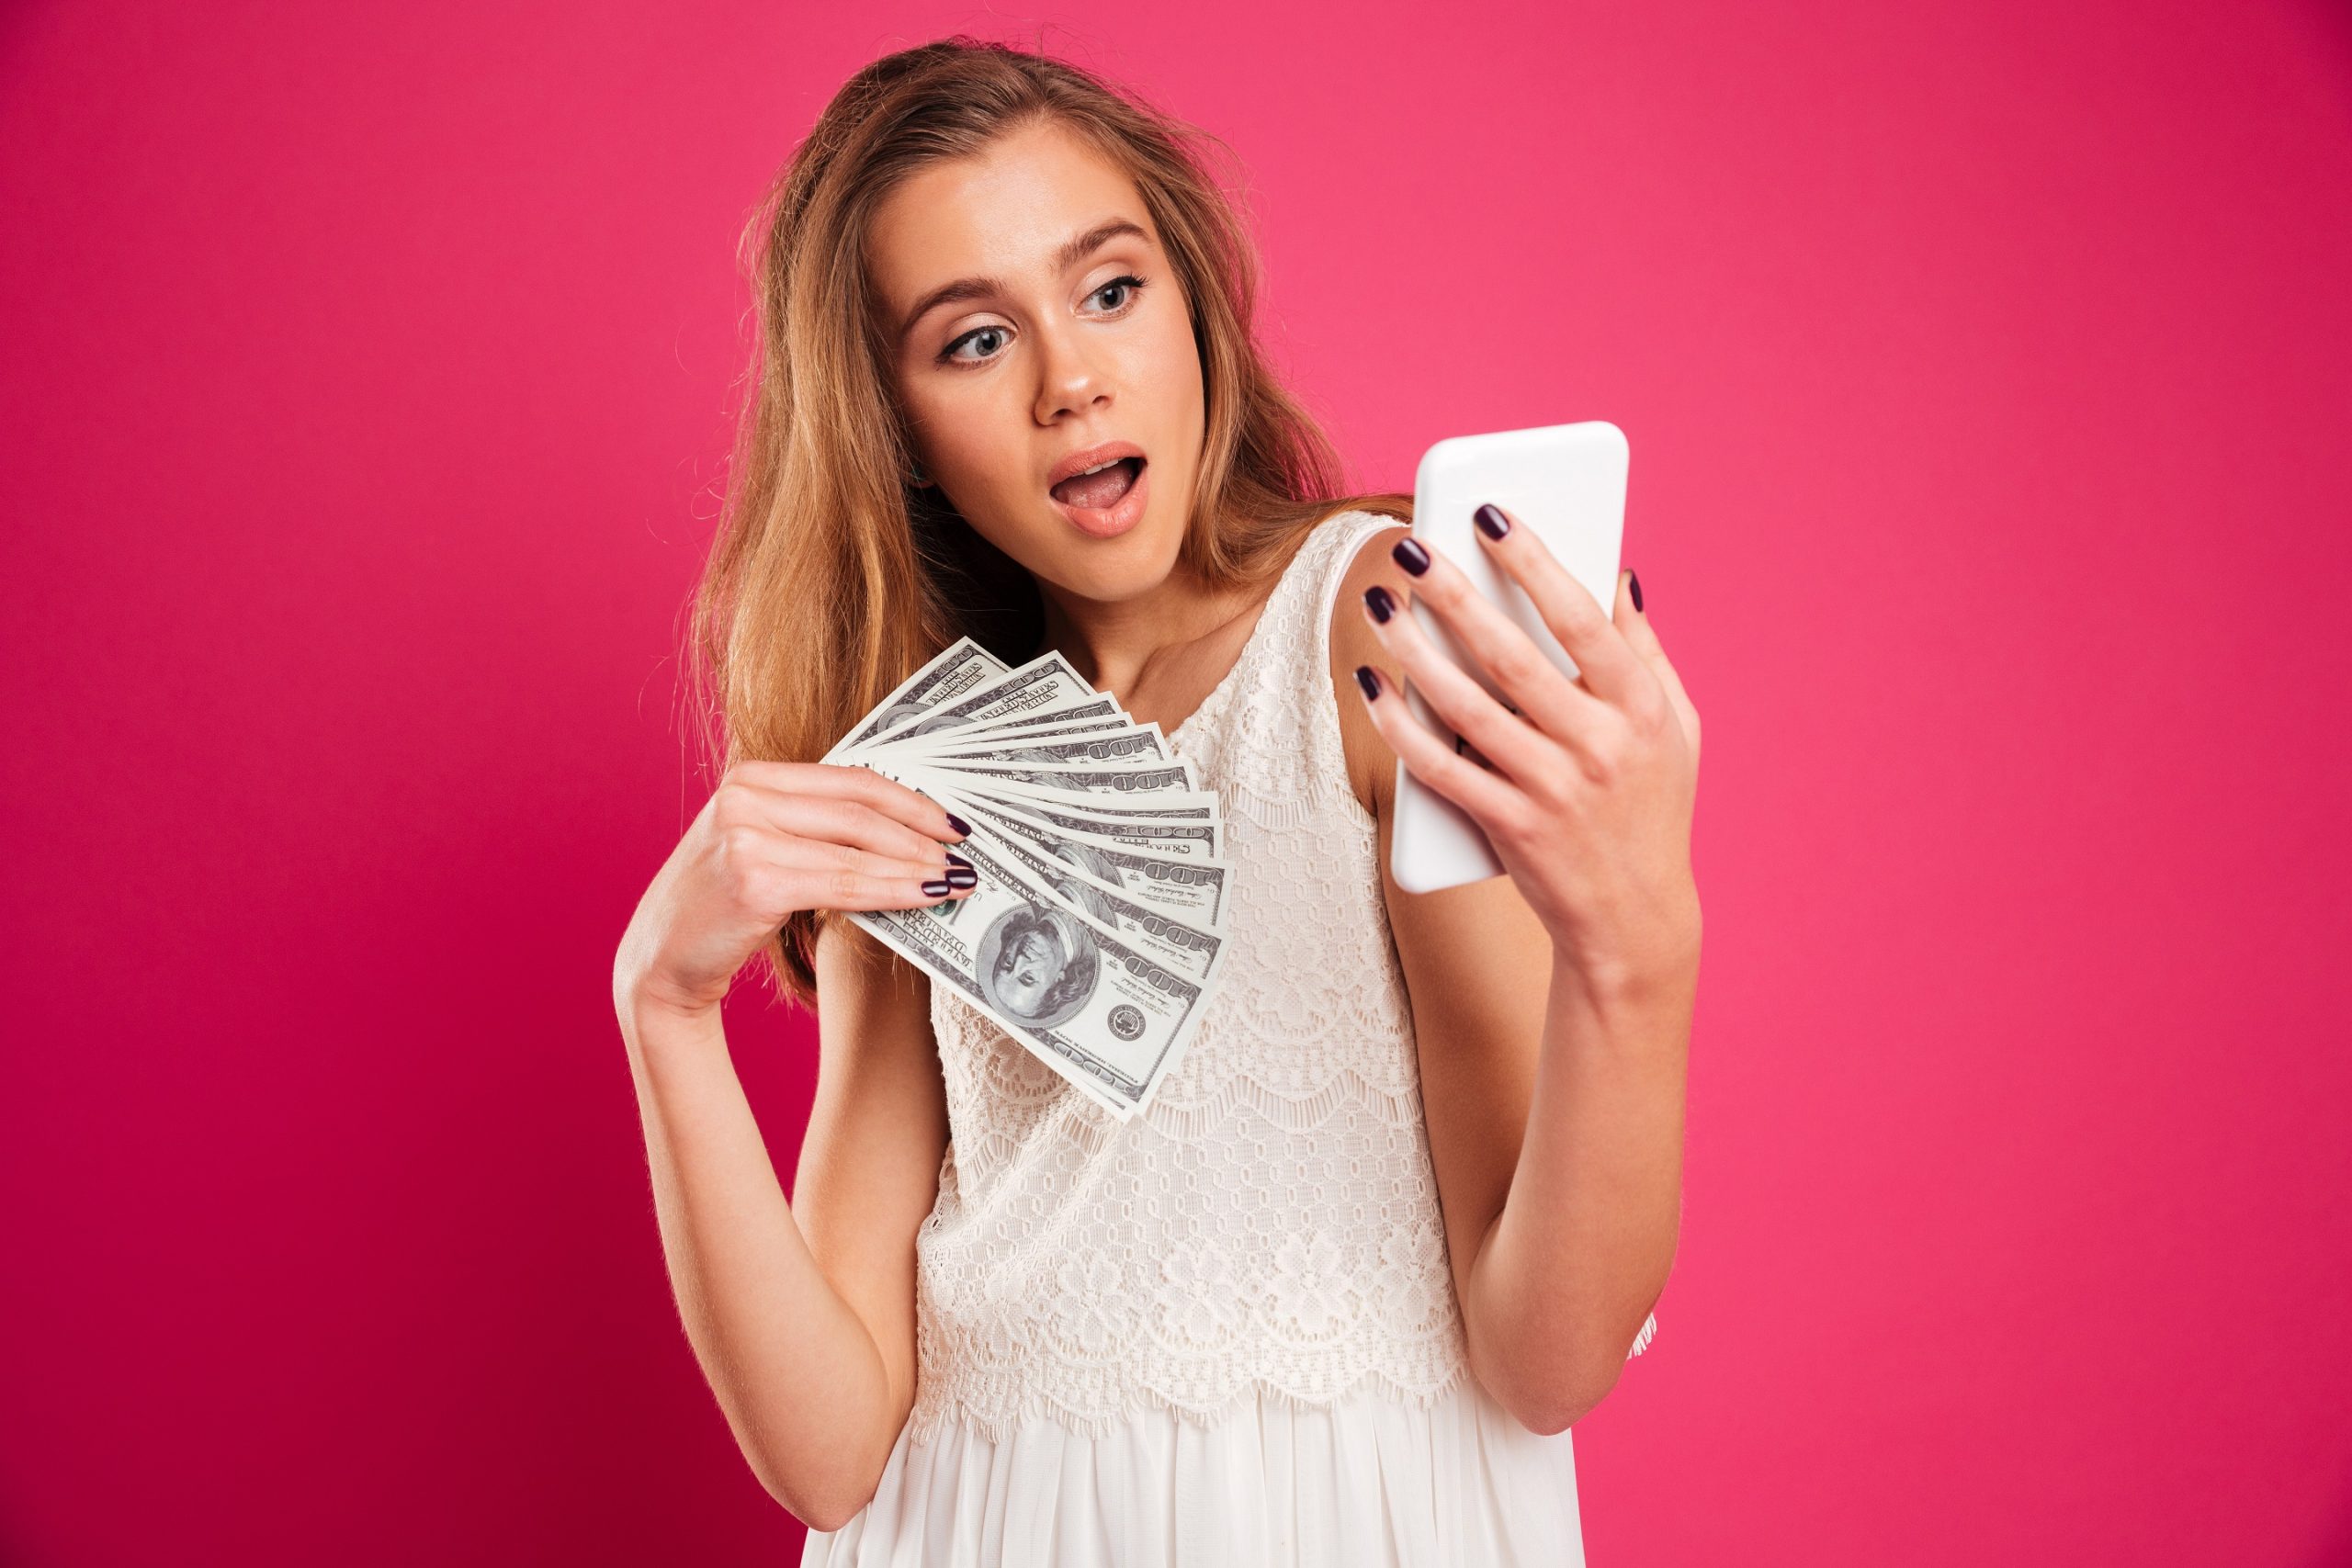 Portrait of a shocked pretty girl holding money banknotes while resding message on mobile phone isolated over pink background